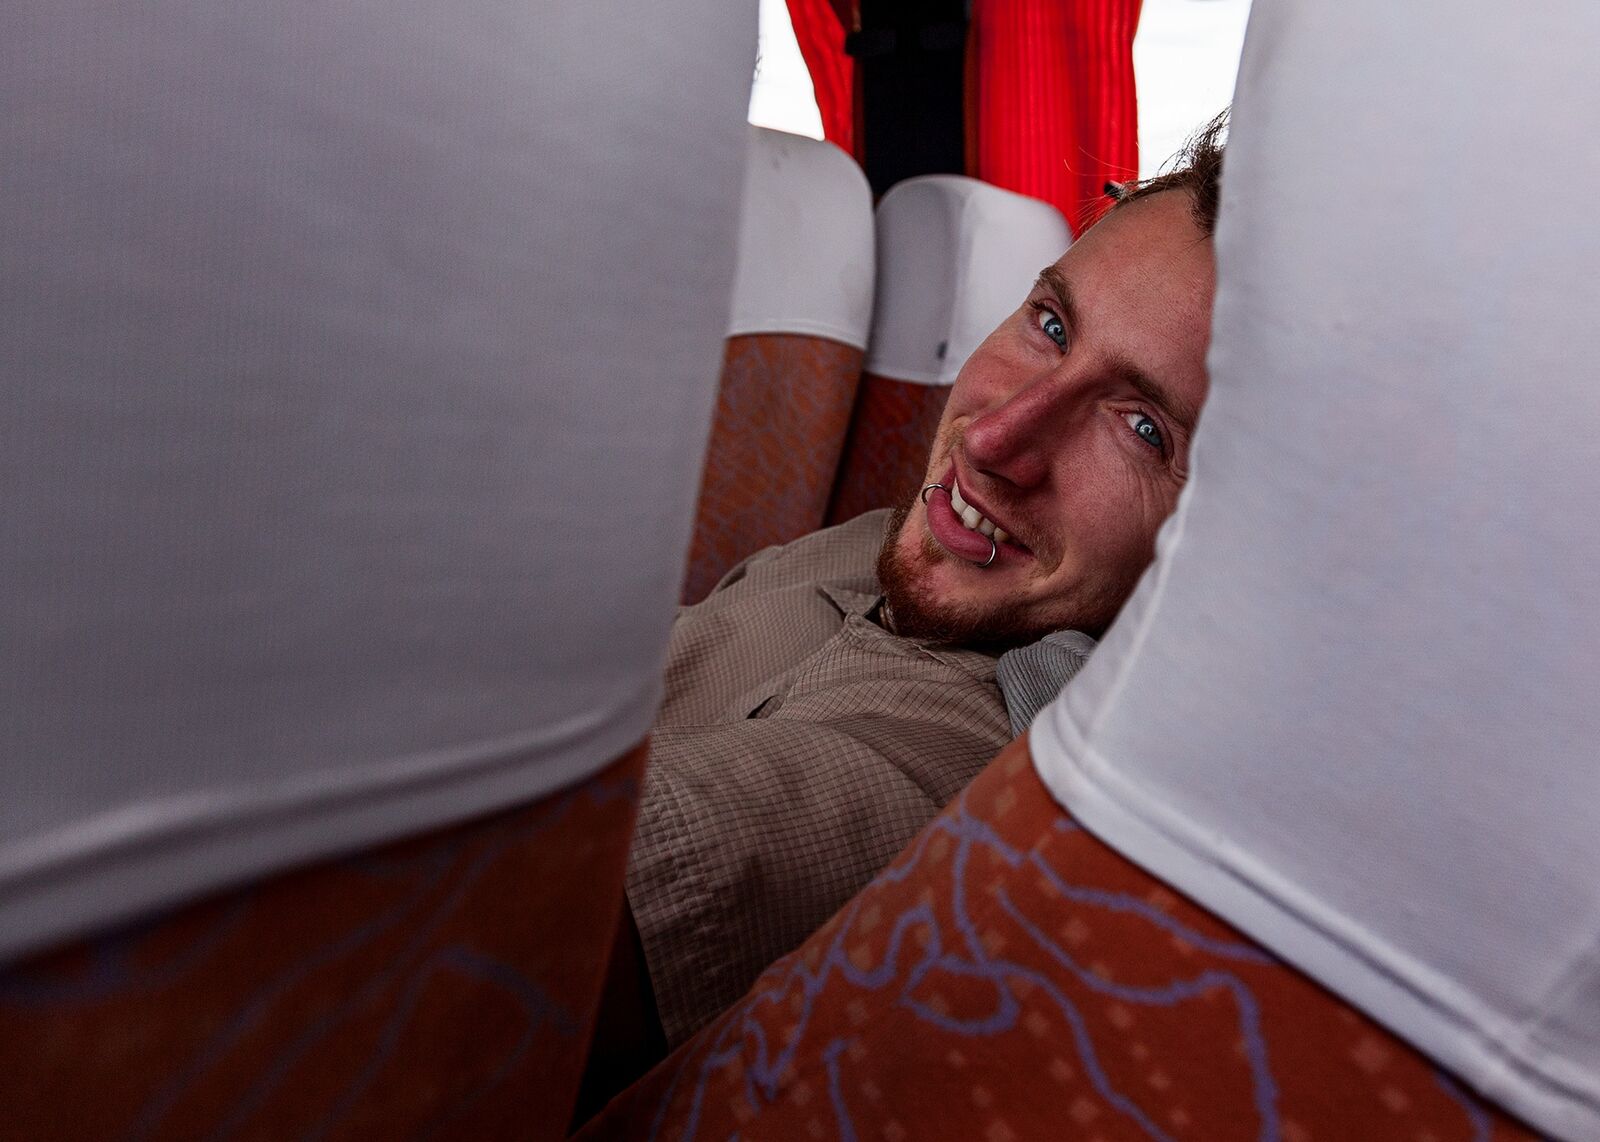 Stephen on a bus in Southern Chile